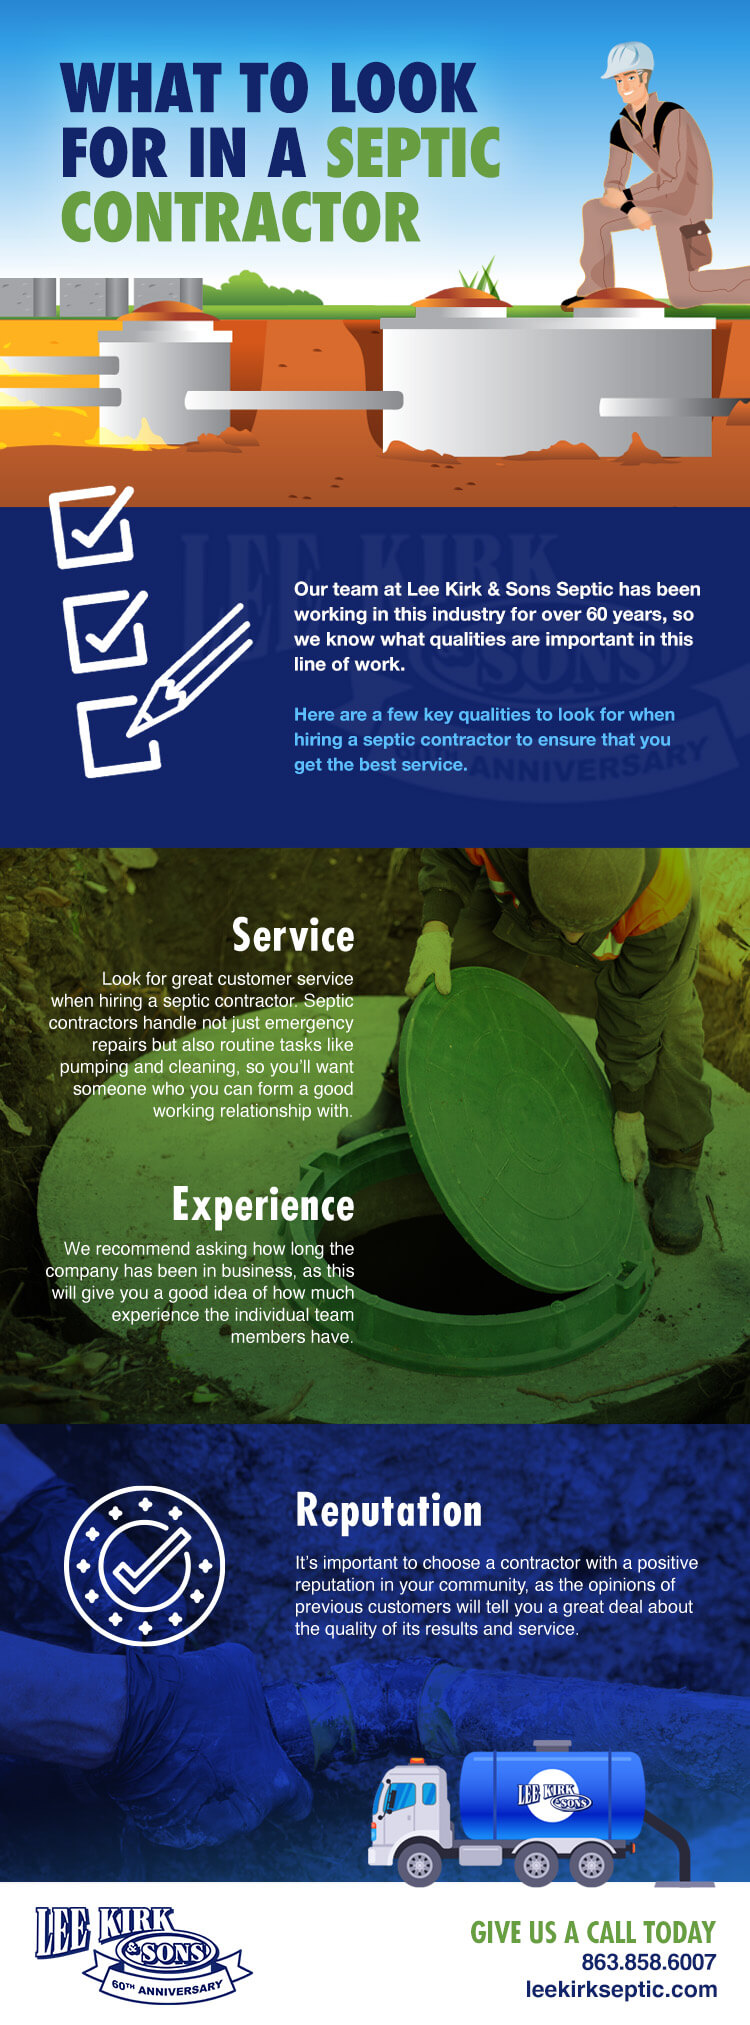 What to Look for in a Septic Contractor